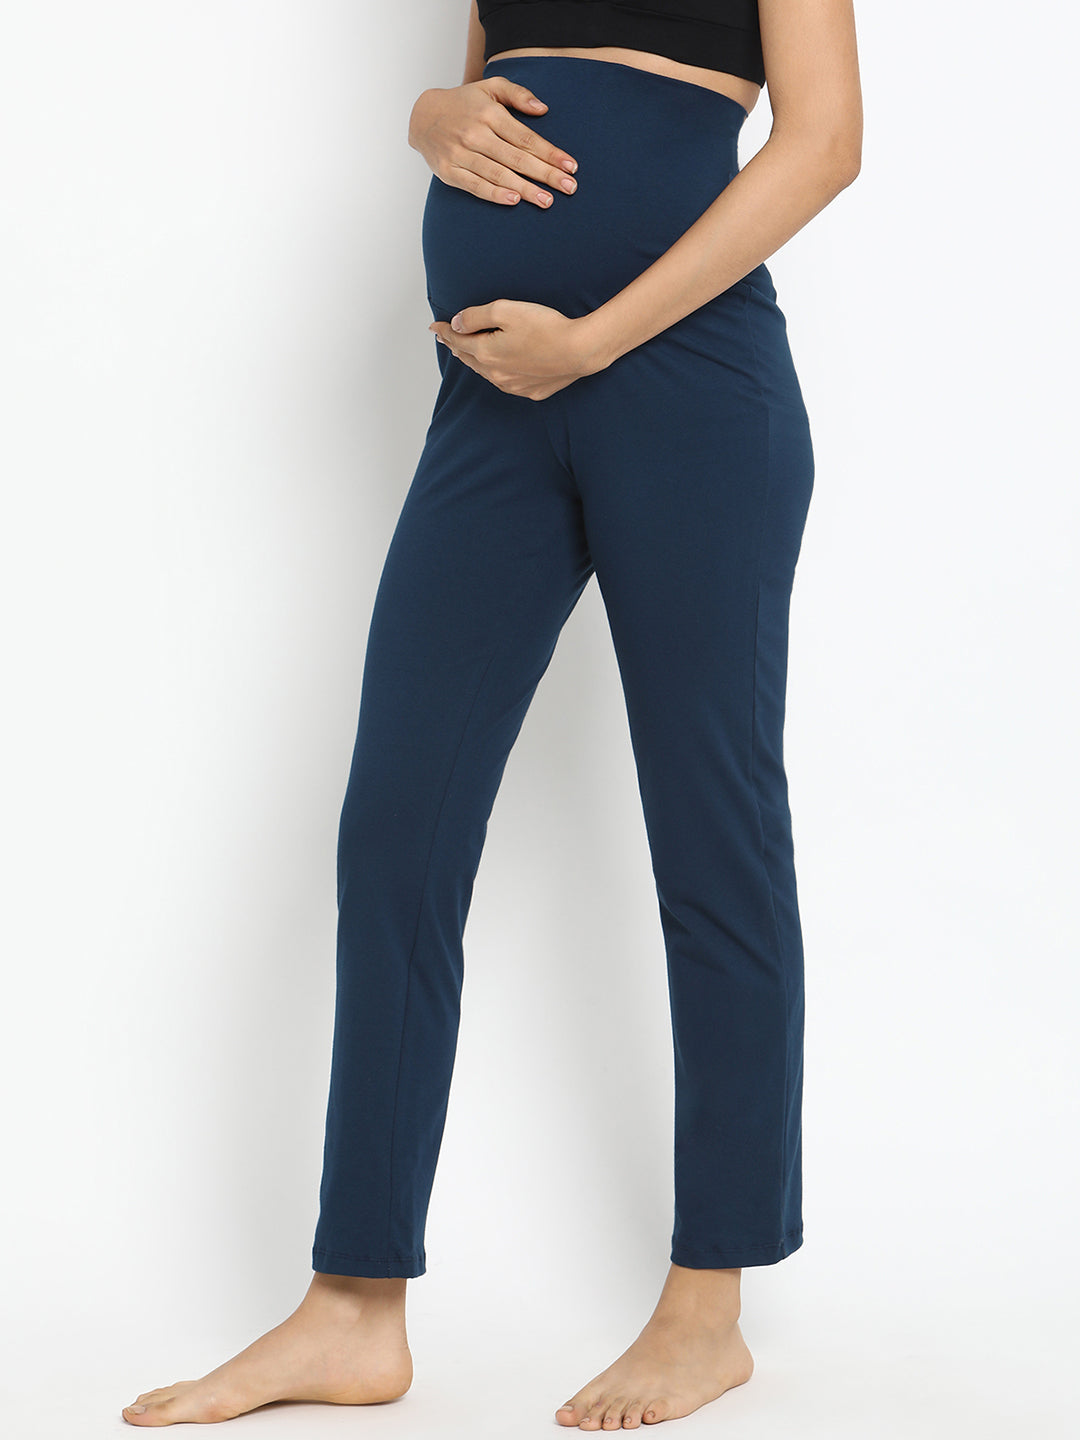 Foucome Maternity Dress Pants Wide Leg Work Office Over-Bump Trousers Black  US L - Tag XXXL : Amazon.ca: Clothing, Shoes & Accessories